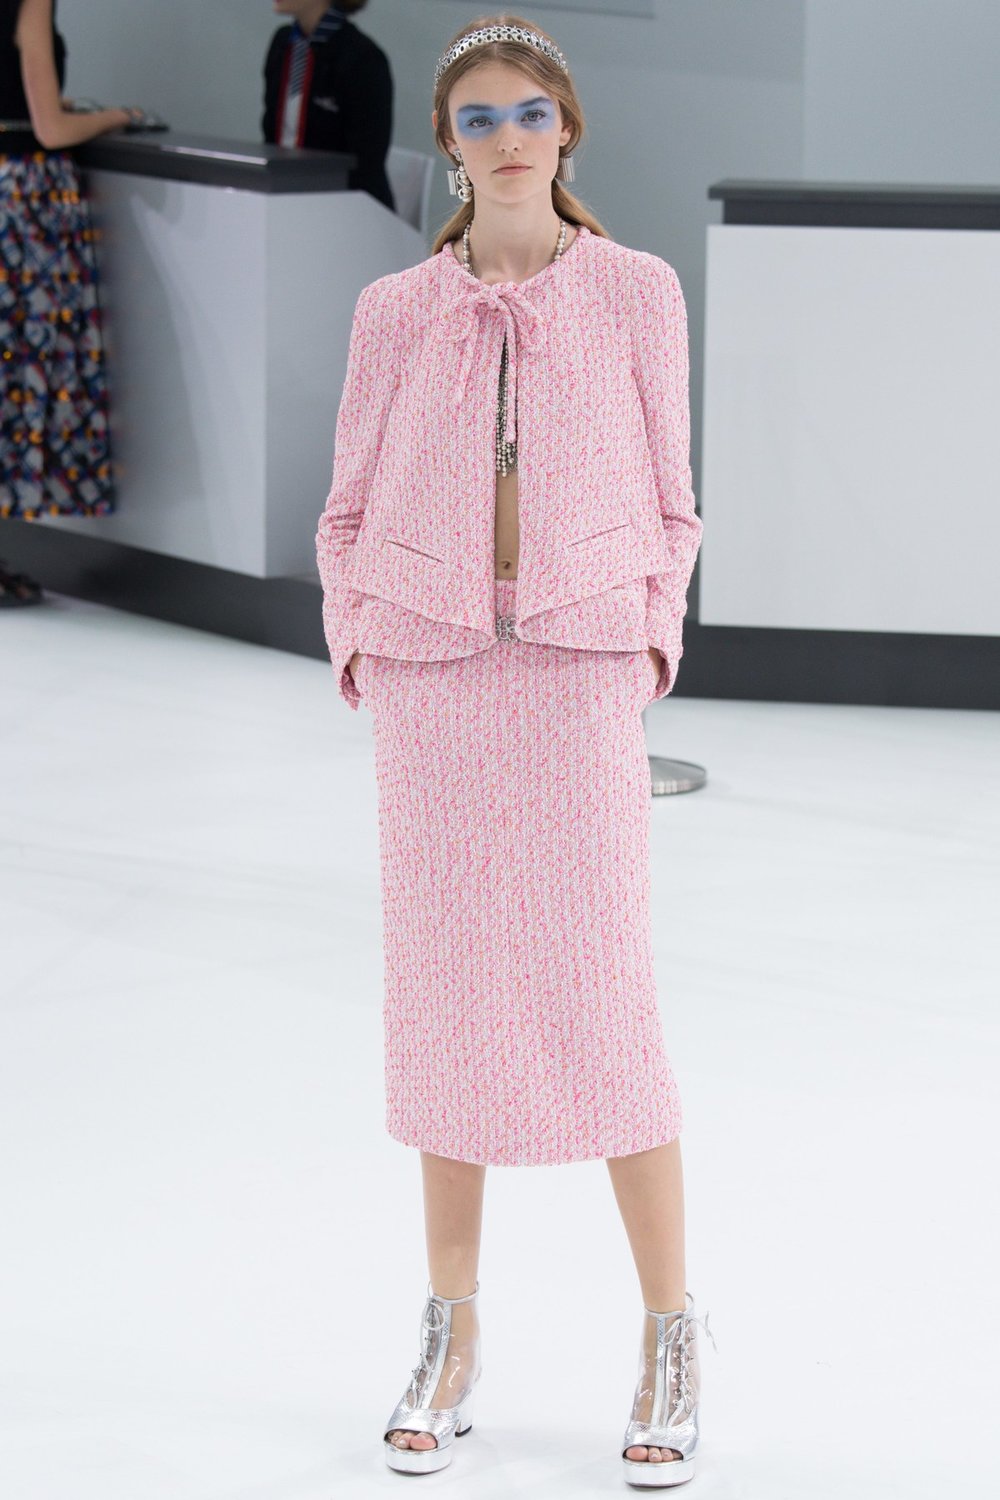 Chanel Spring/Summer 2016 Pink Skirt Suit — The Posh Pop-Up